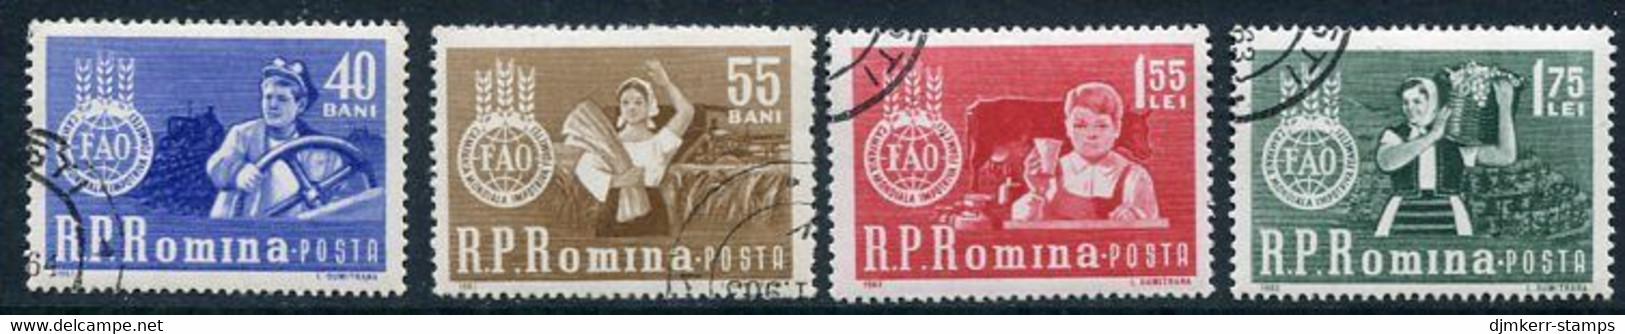 ROMANIA 1963  Freedom From Hunger Used  Michel 2126-29 - Usado